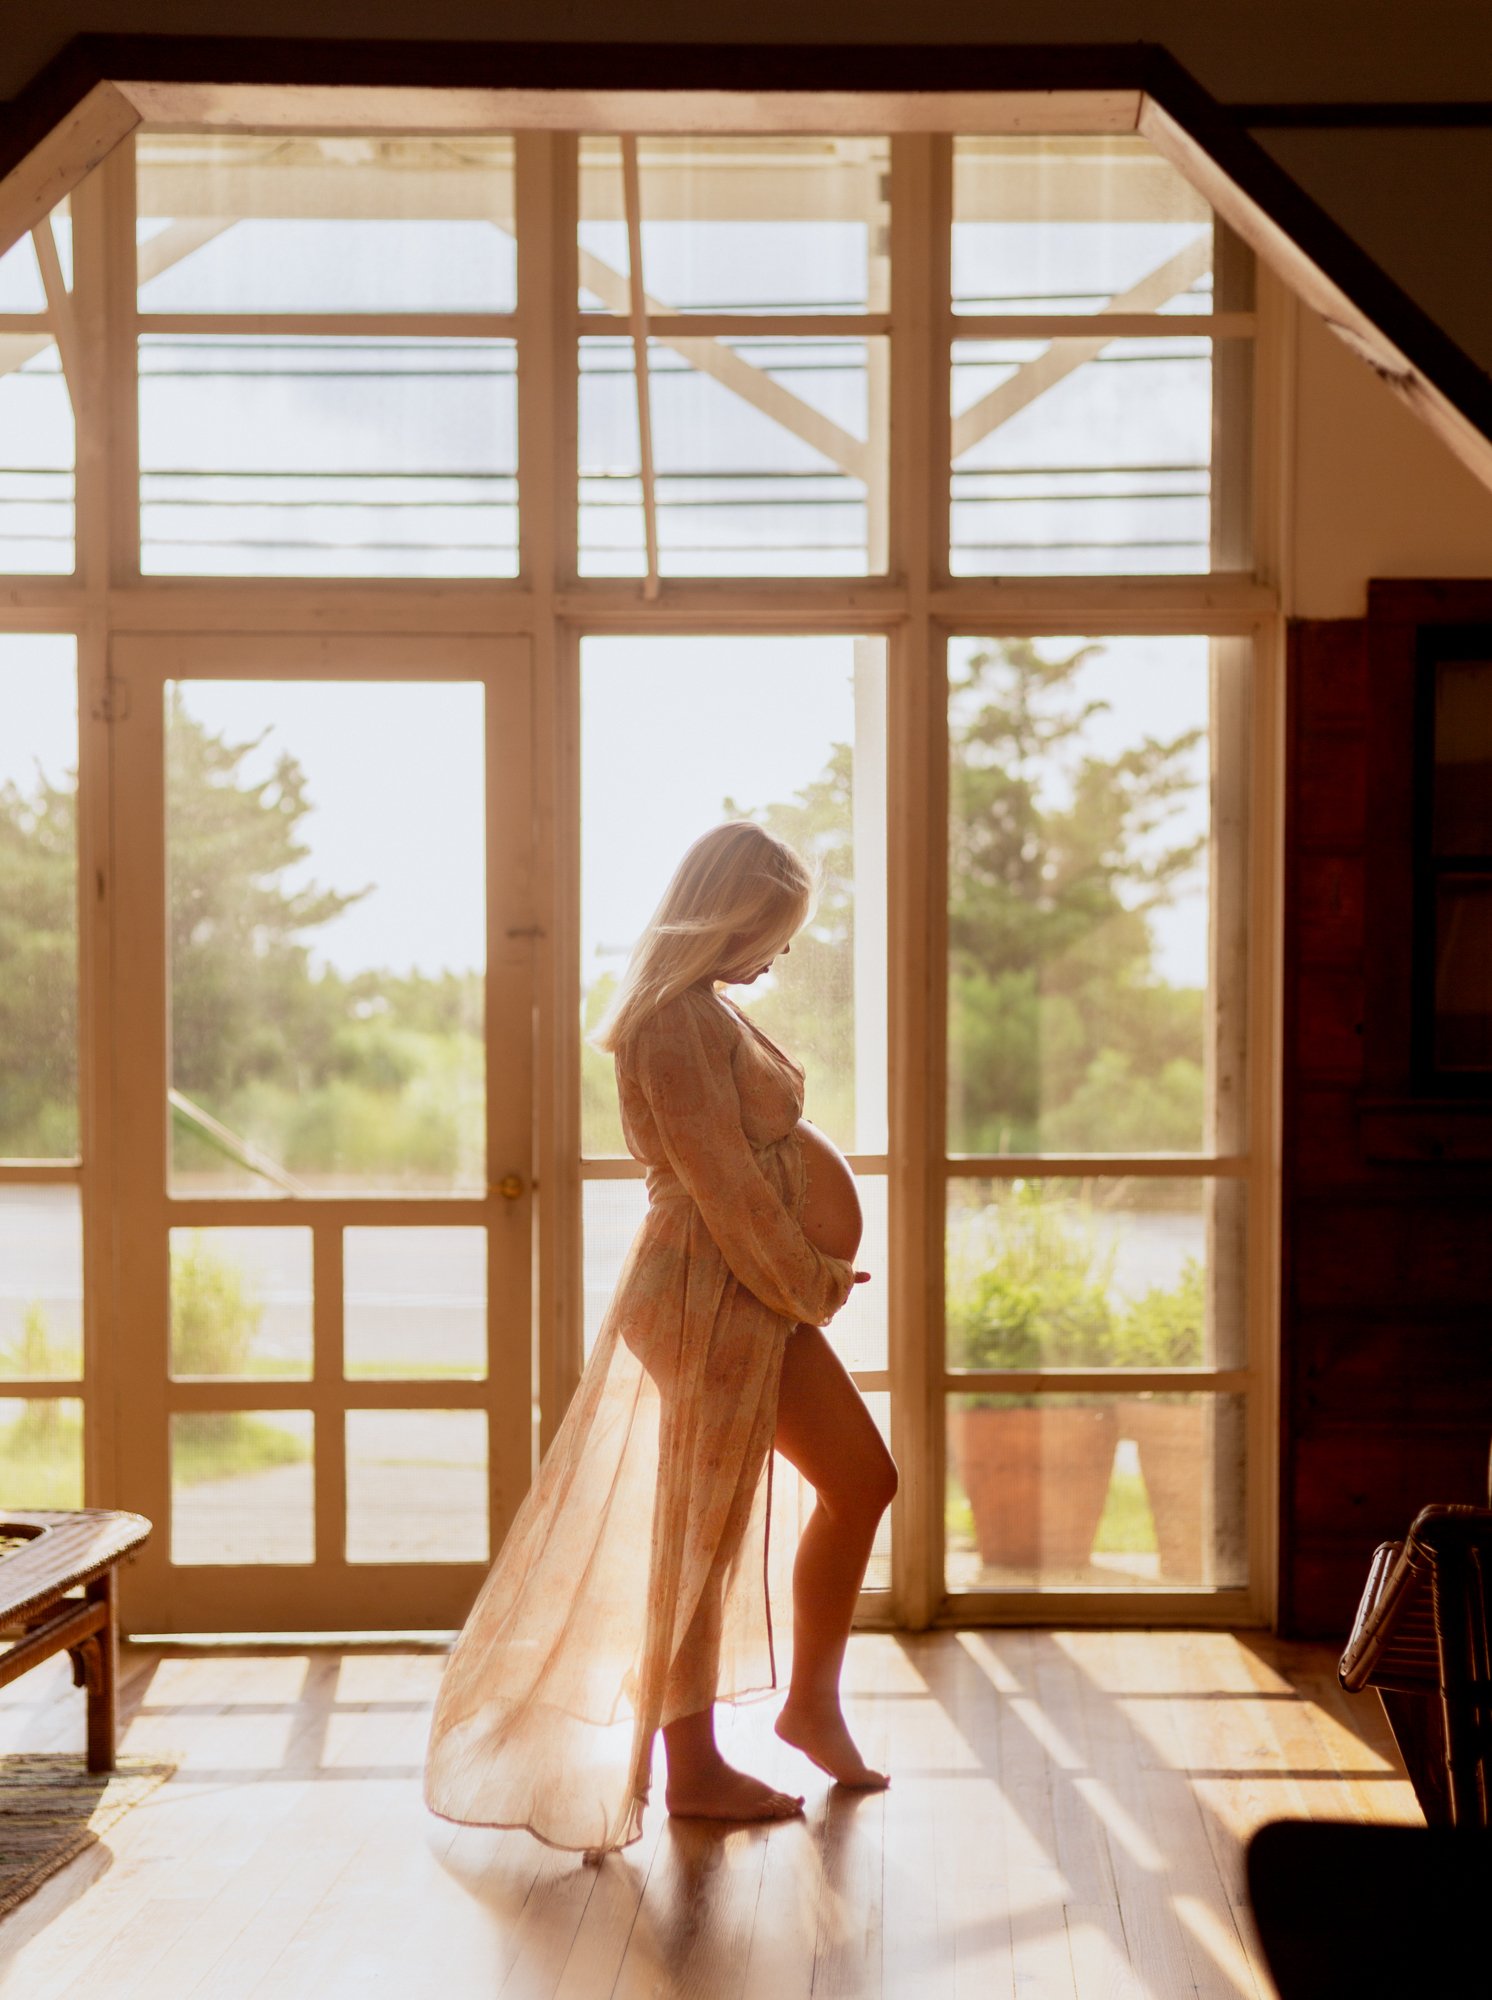 Pregnant woman wearing sheer gown, standing in natural light and cradling her belly, framed in wooden beach house door at the Jersey shore.